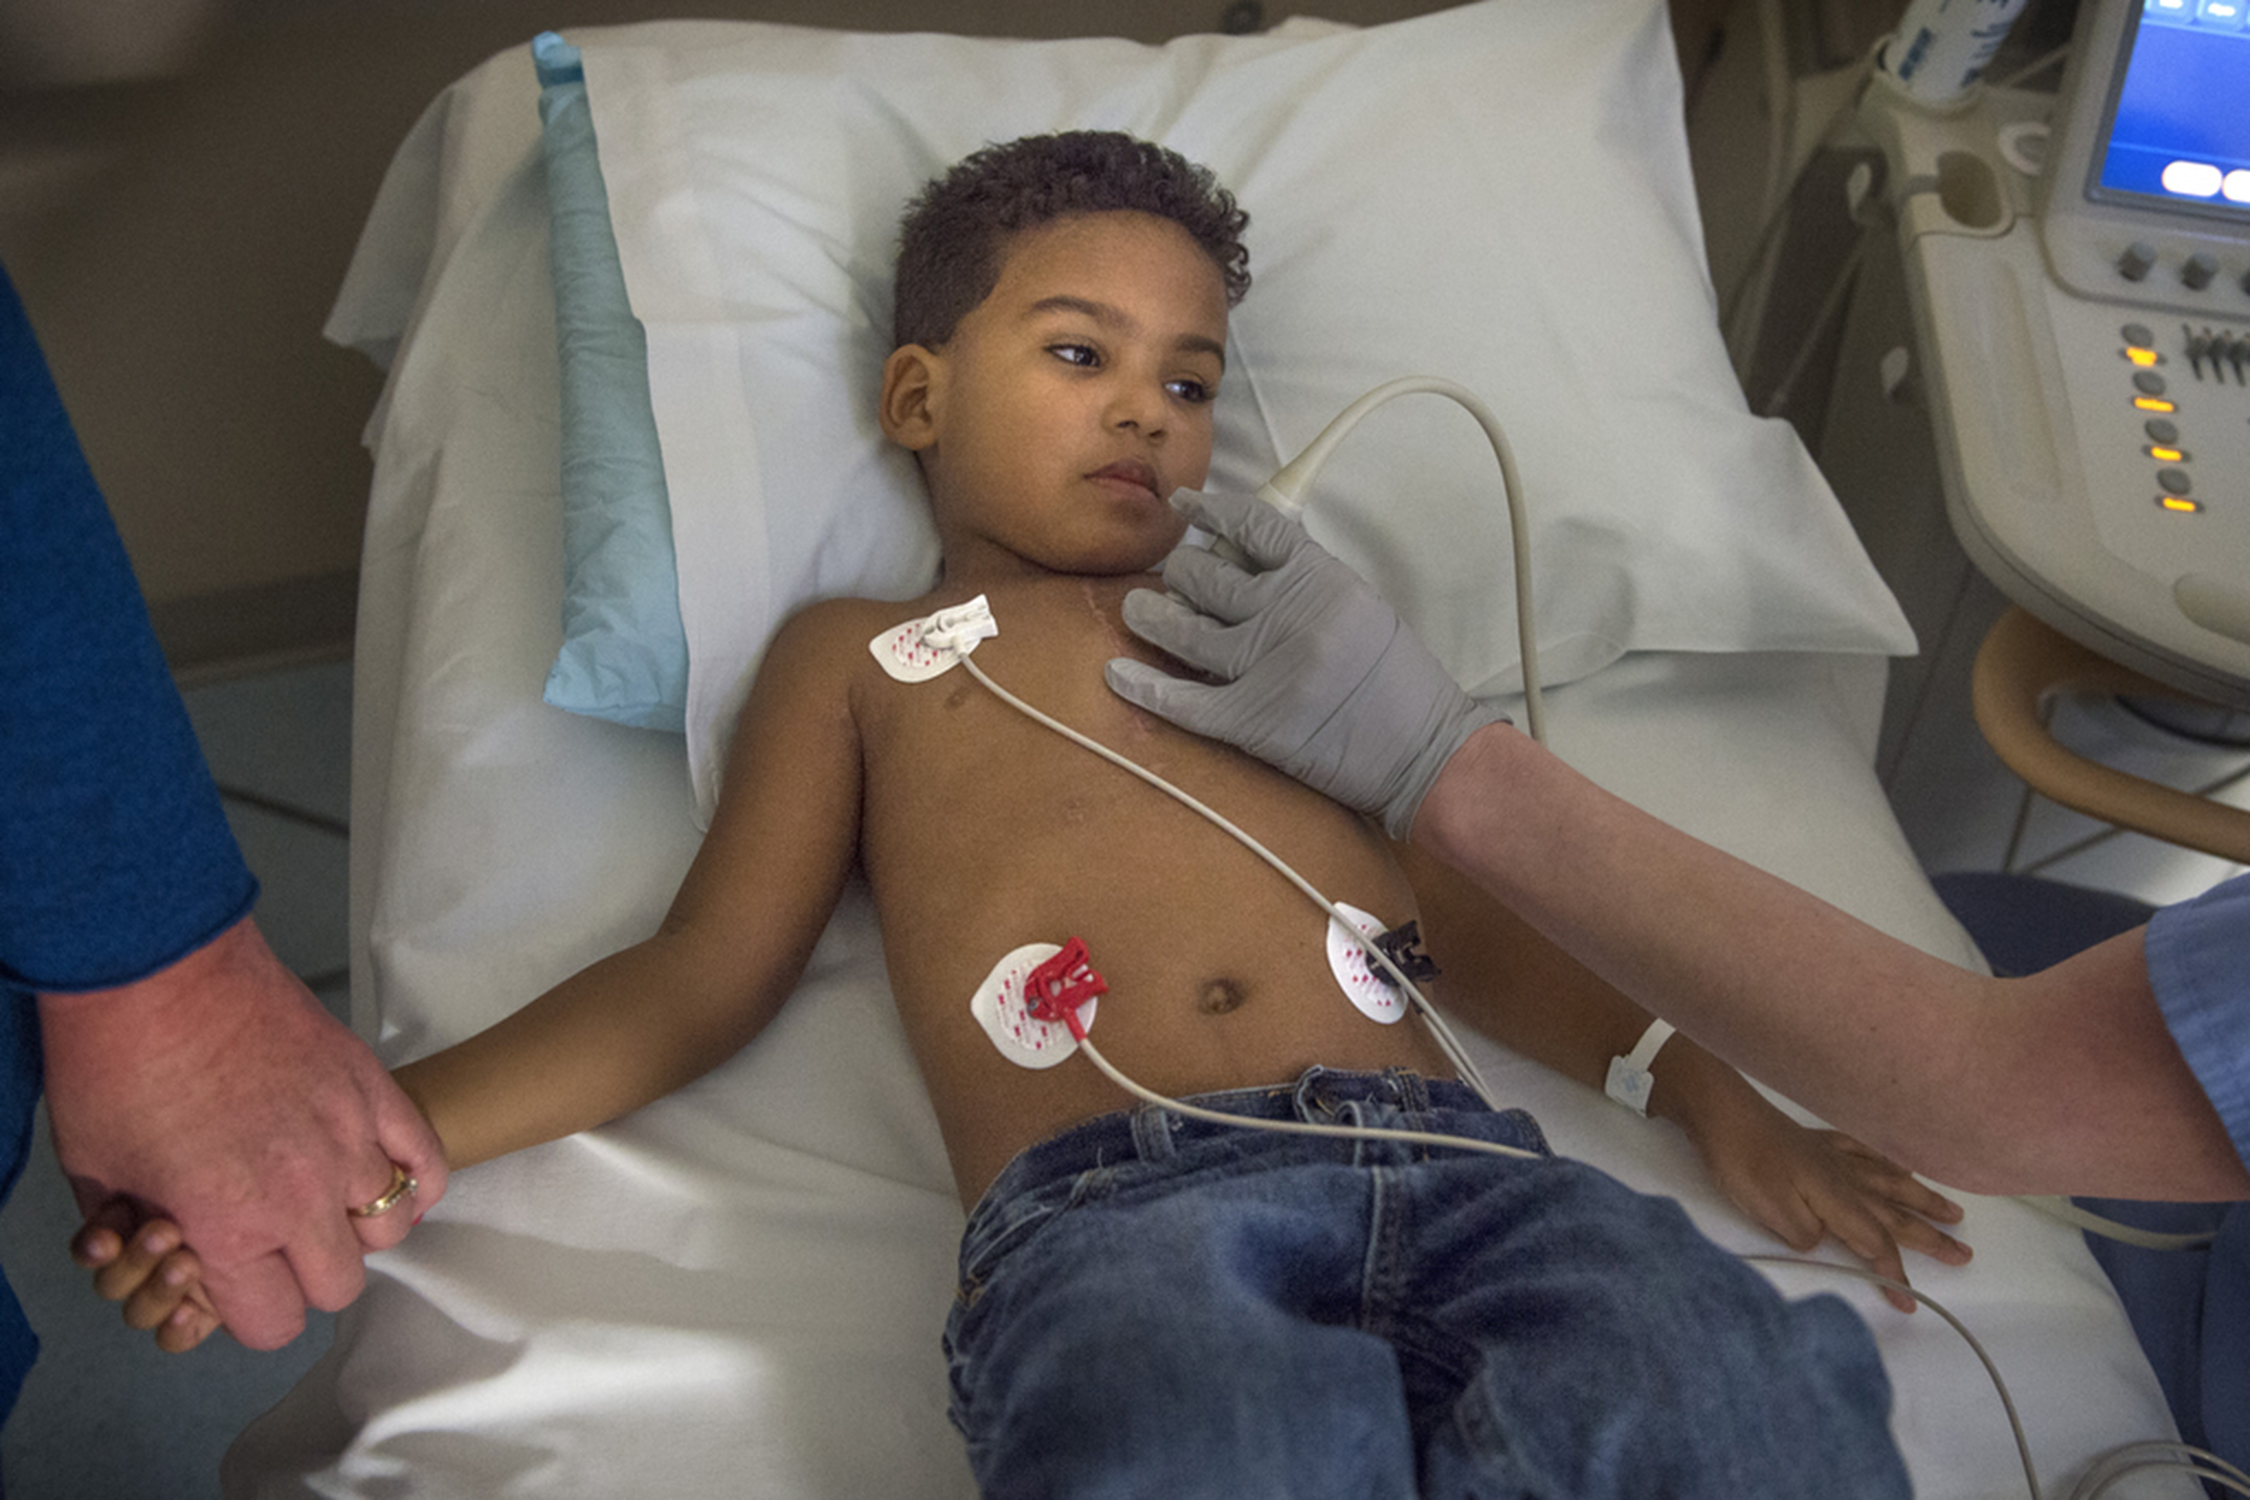 Child wearing heart monitors lying in bed while healthcare provider uses imaging device on his chest.